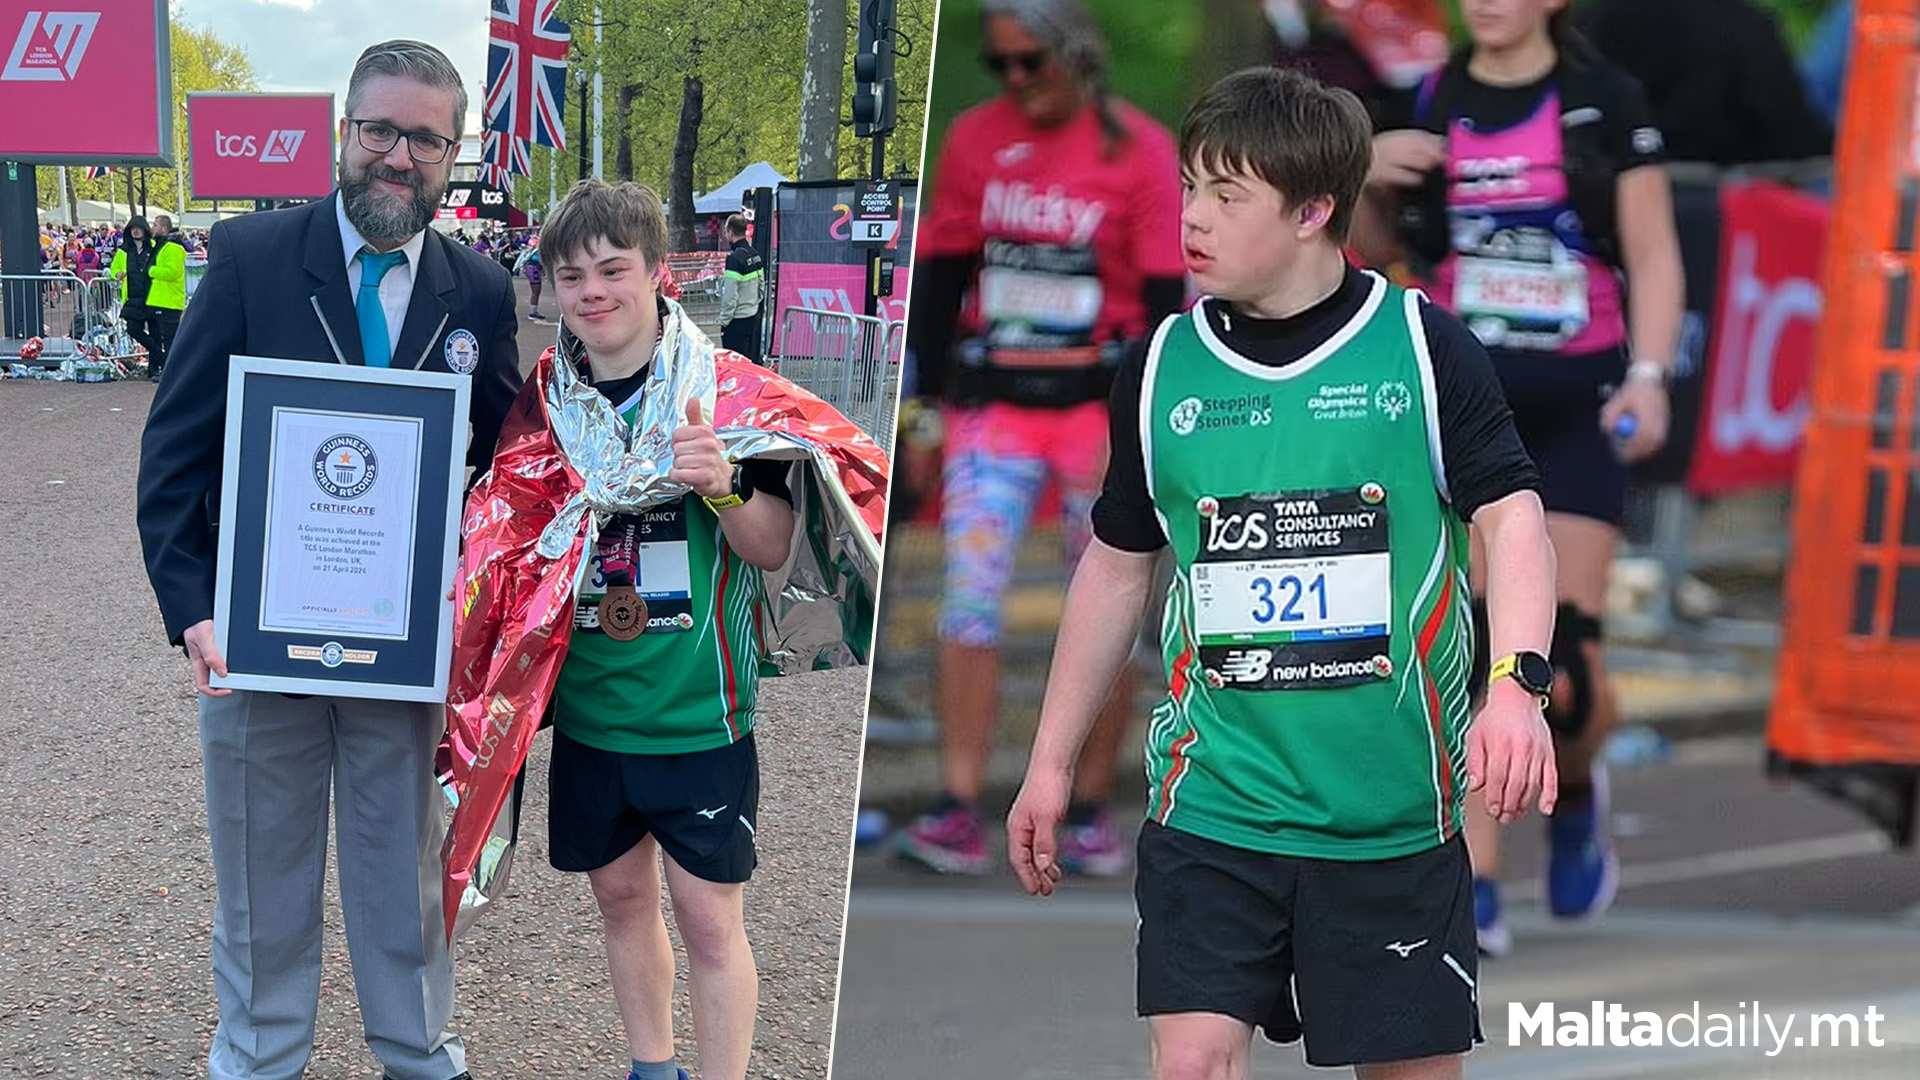 19 Year Old Youngest With Down's Syndrome To Finish London Marathon